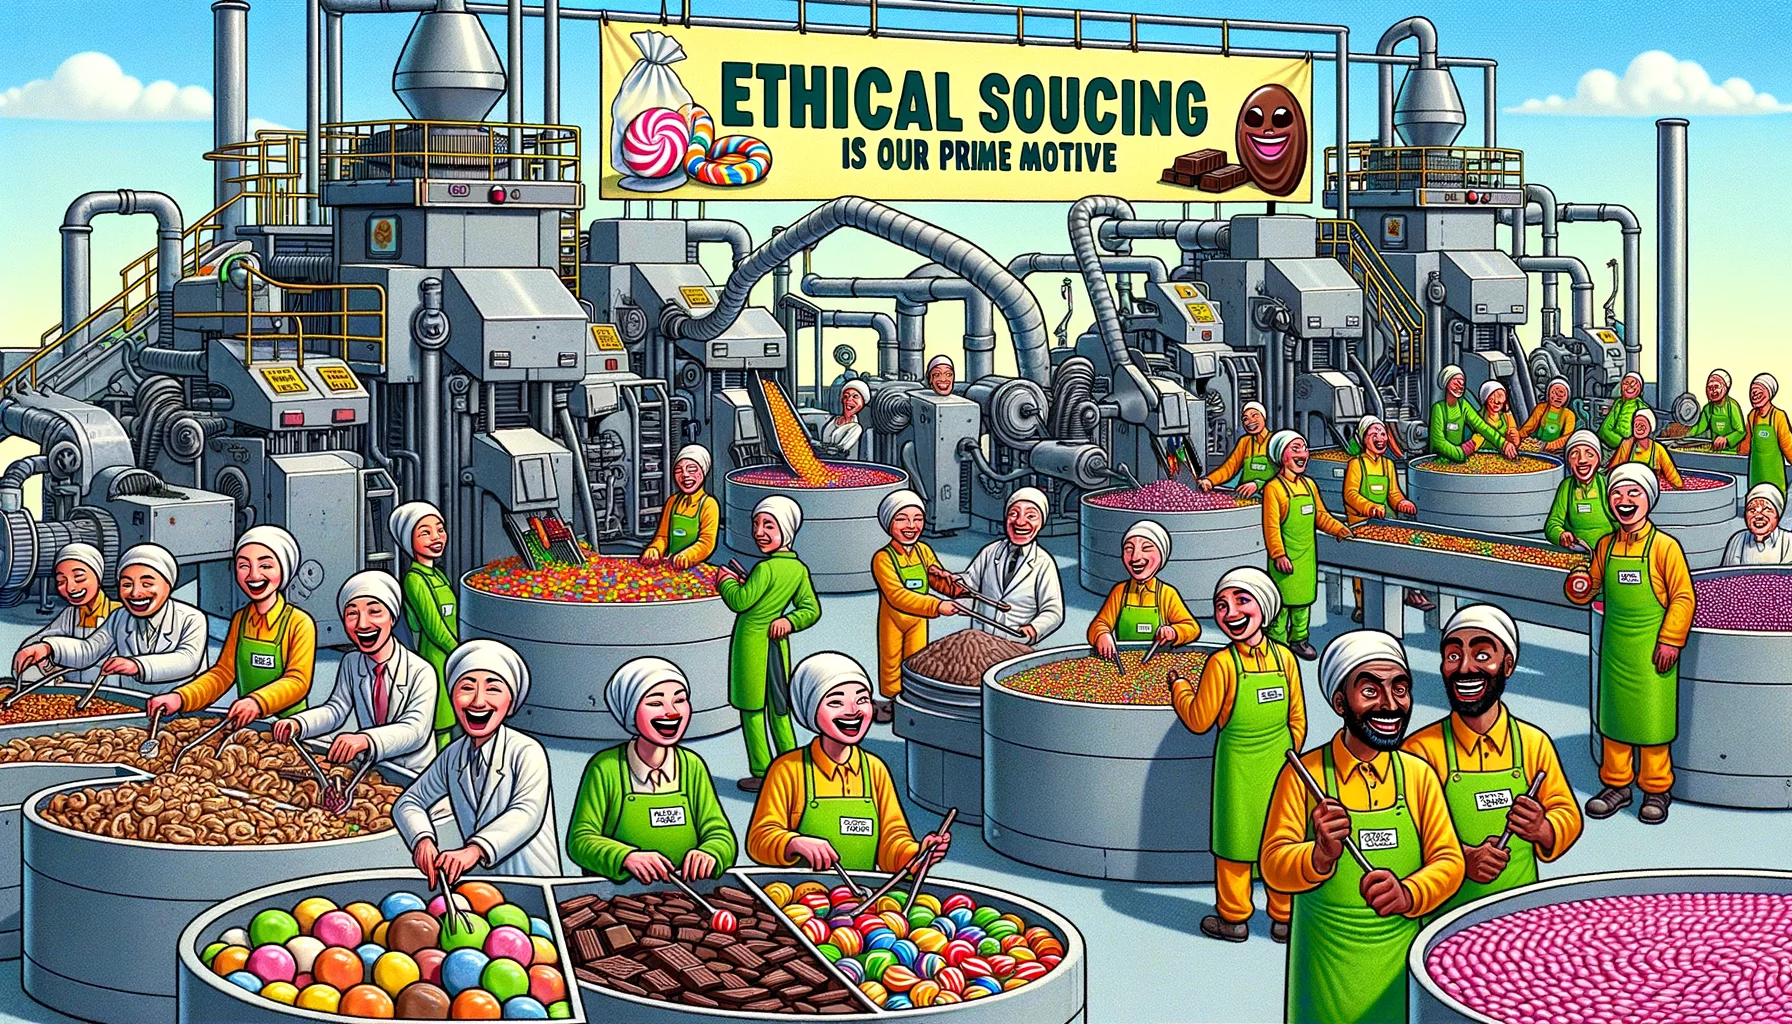 Imagine a comical yet realistic scene that perfectly embodies 'Ethical Sourcing in Candy Production'. The image should comprise a candy factory with machinery demonstrating the production process. The workers should represent diverse descents like Middle-Eastern, South Asian, and Caucasian. Make half of them female, and half male. They are all wearing bright-colored protective clothes, laughing and in high spirits. The candies are variously shaped, brightly colored, and appear mouth-wateringly delicious. Displaying their ingredients — sugar canes, cocoa beans, nuts — which all bear a label saying 'ethically sourced'. A large banner across the factory reads 'Ethical Sourcing is our Prime Motive'.